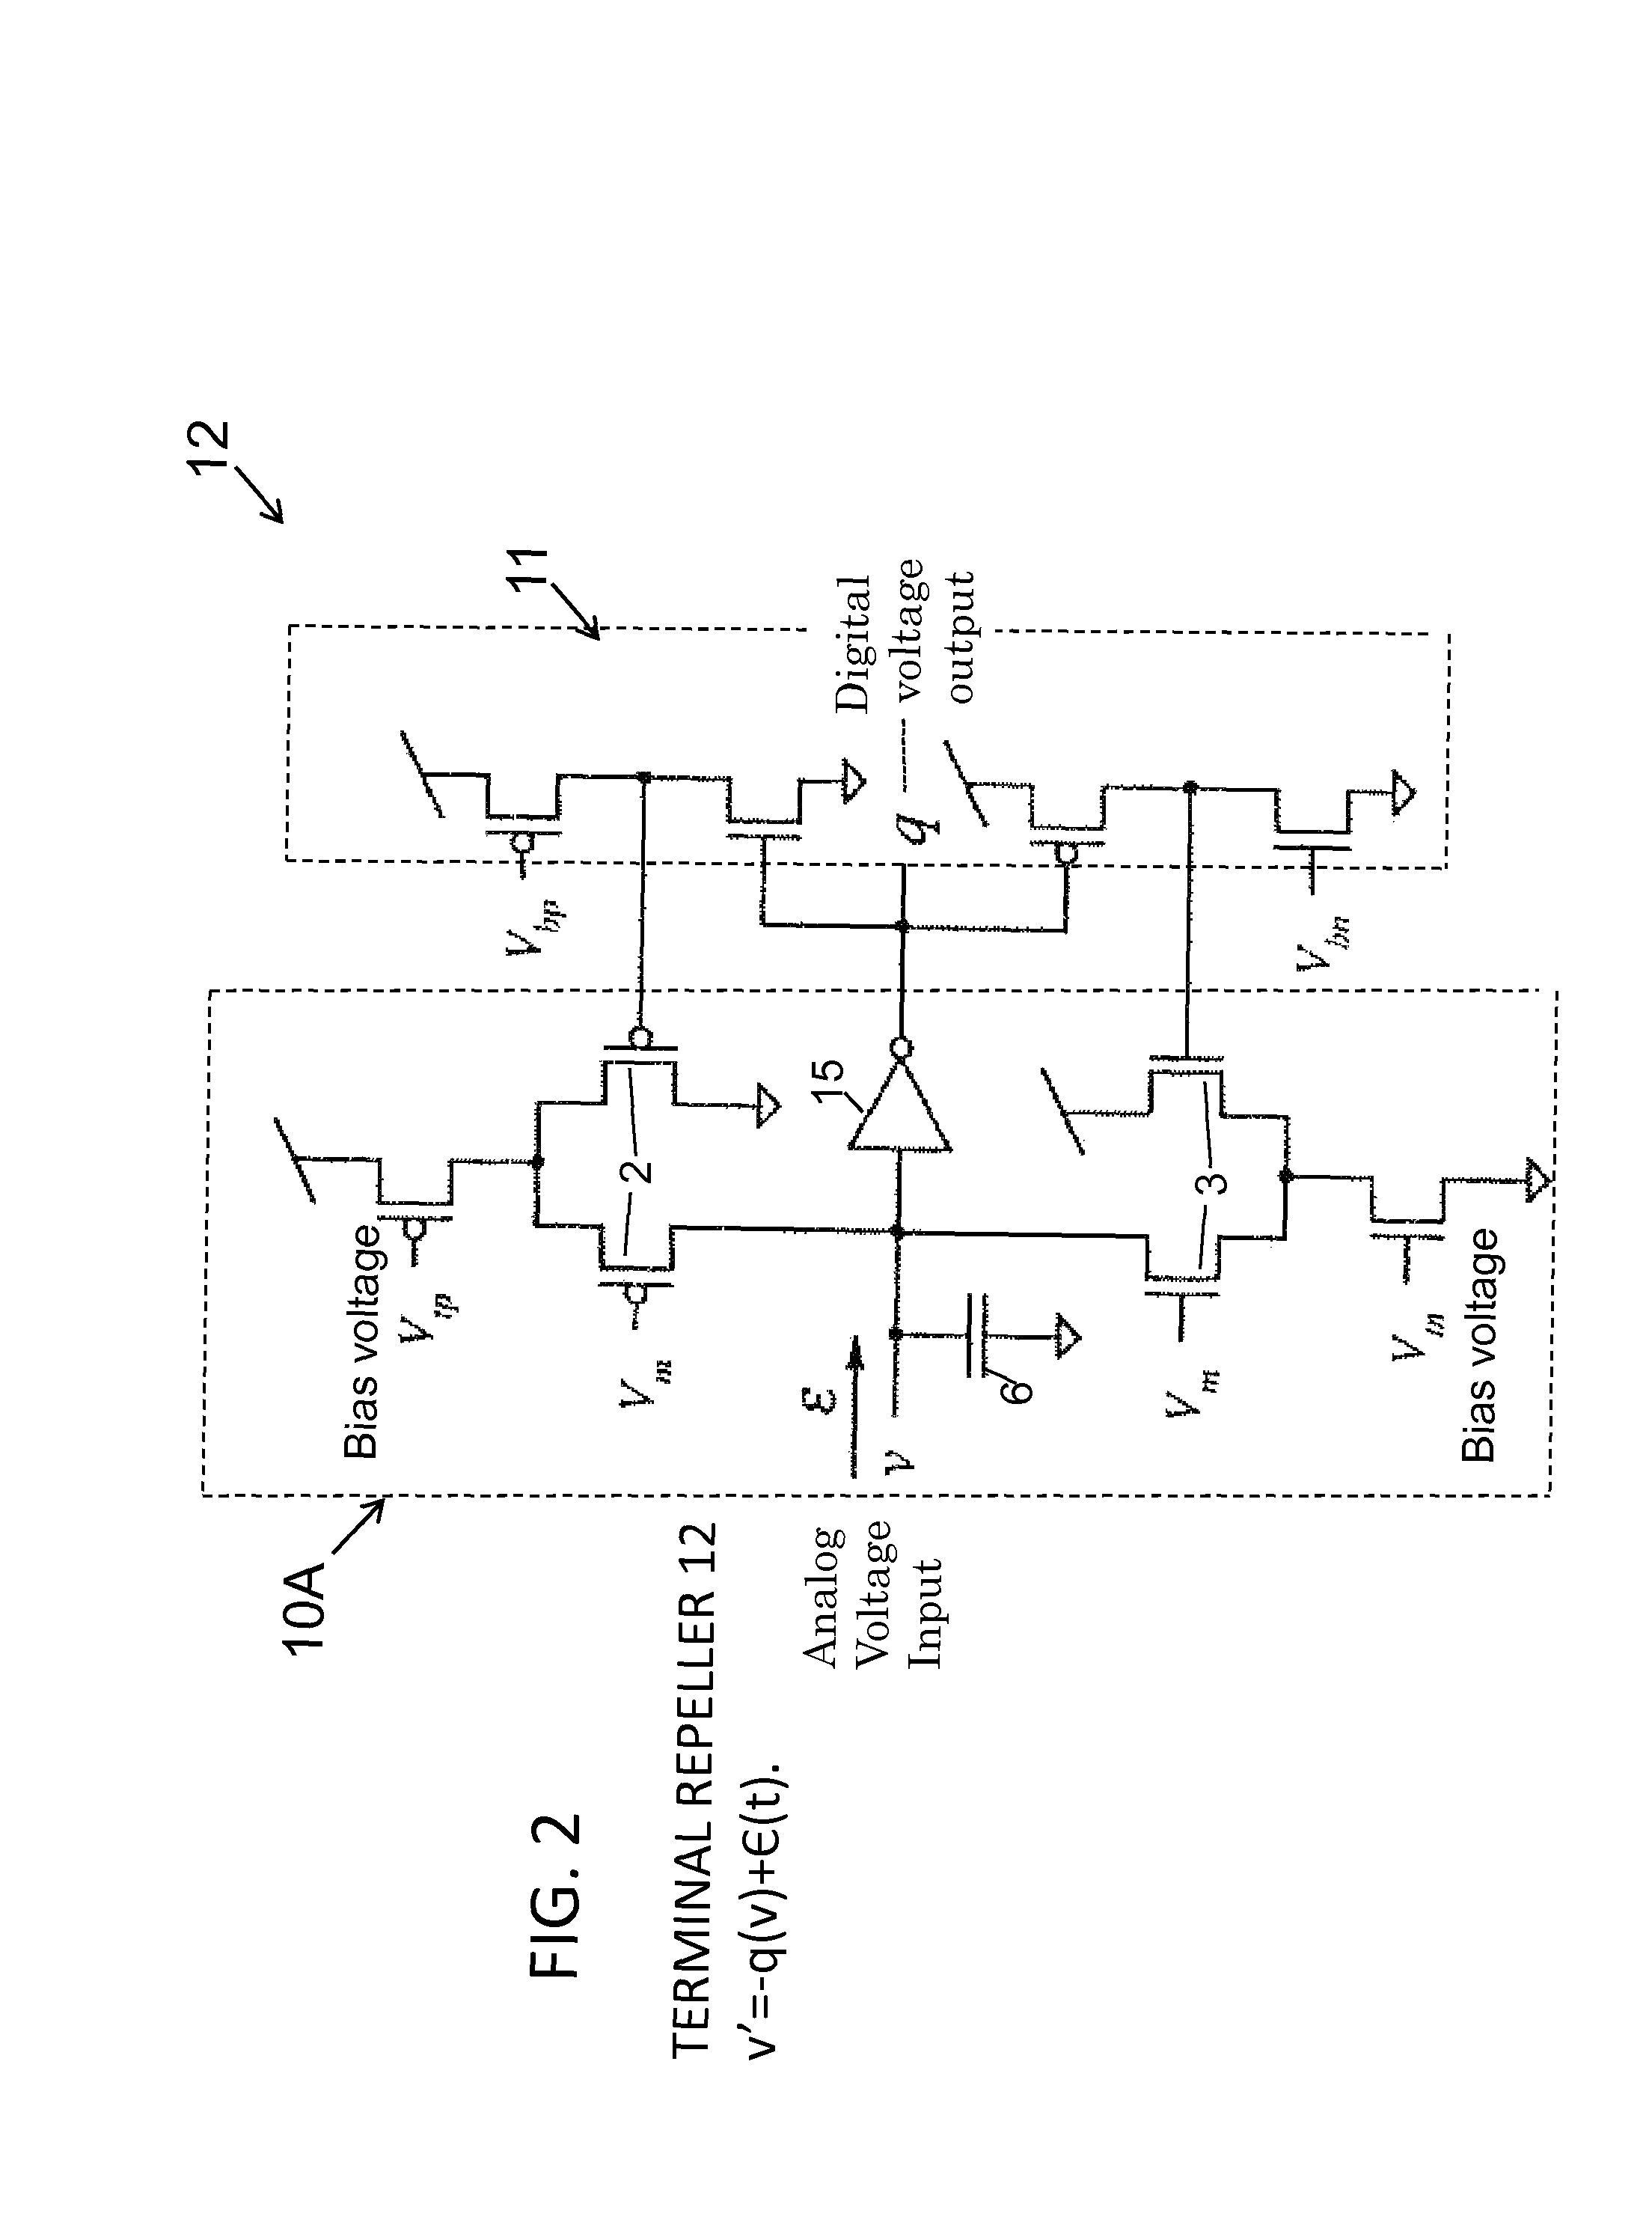 Apparatus and method for using analog circuits to embody non-lipschitz mathematics and properties using attractor and repulsion modes